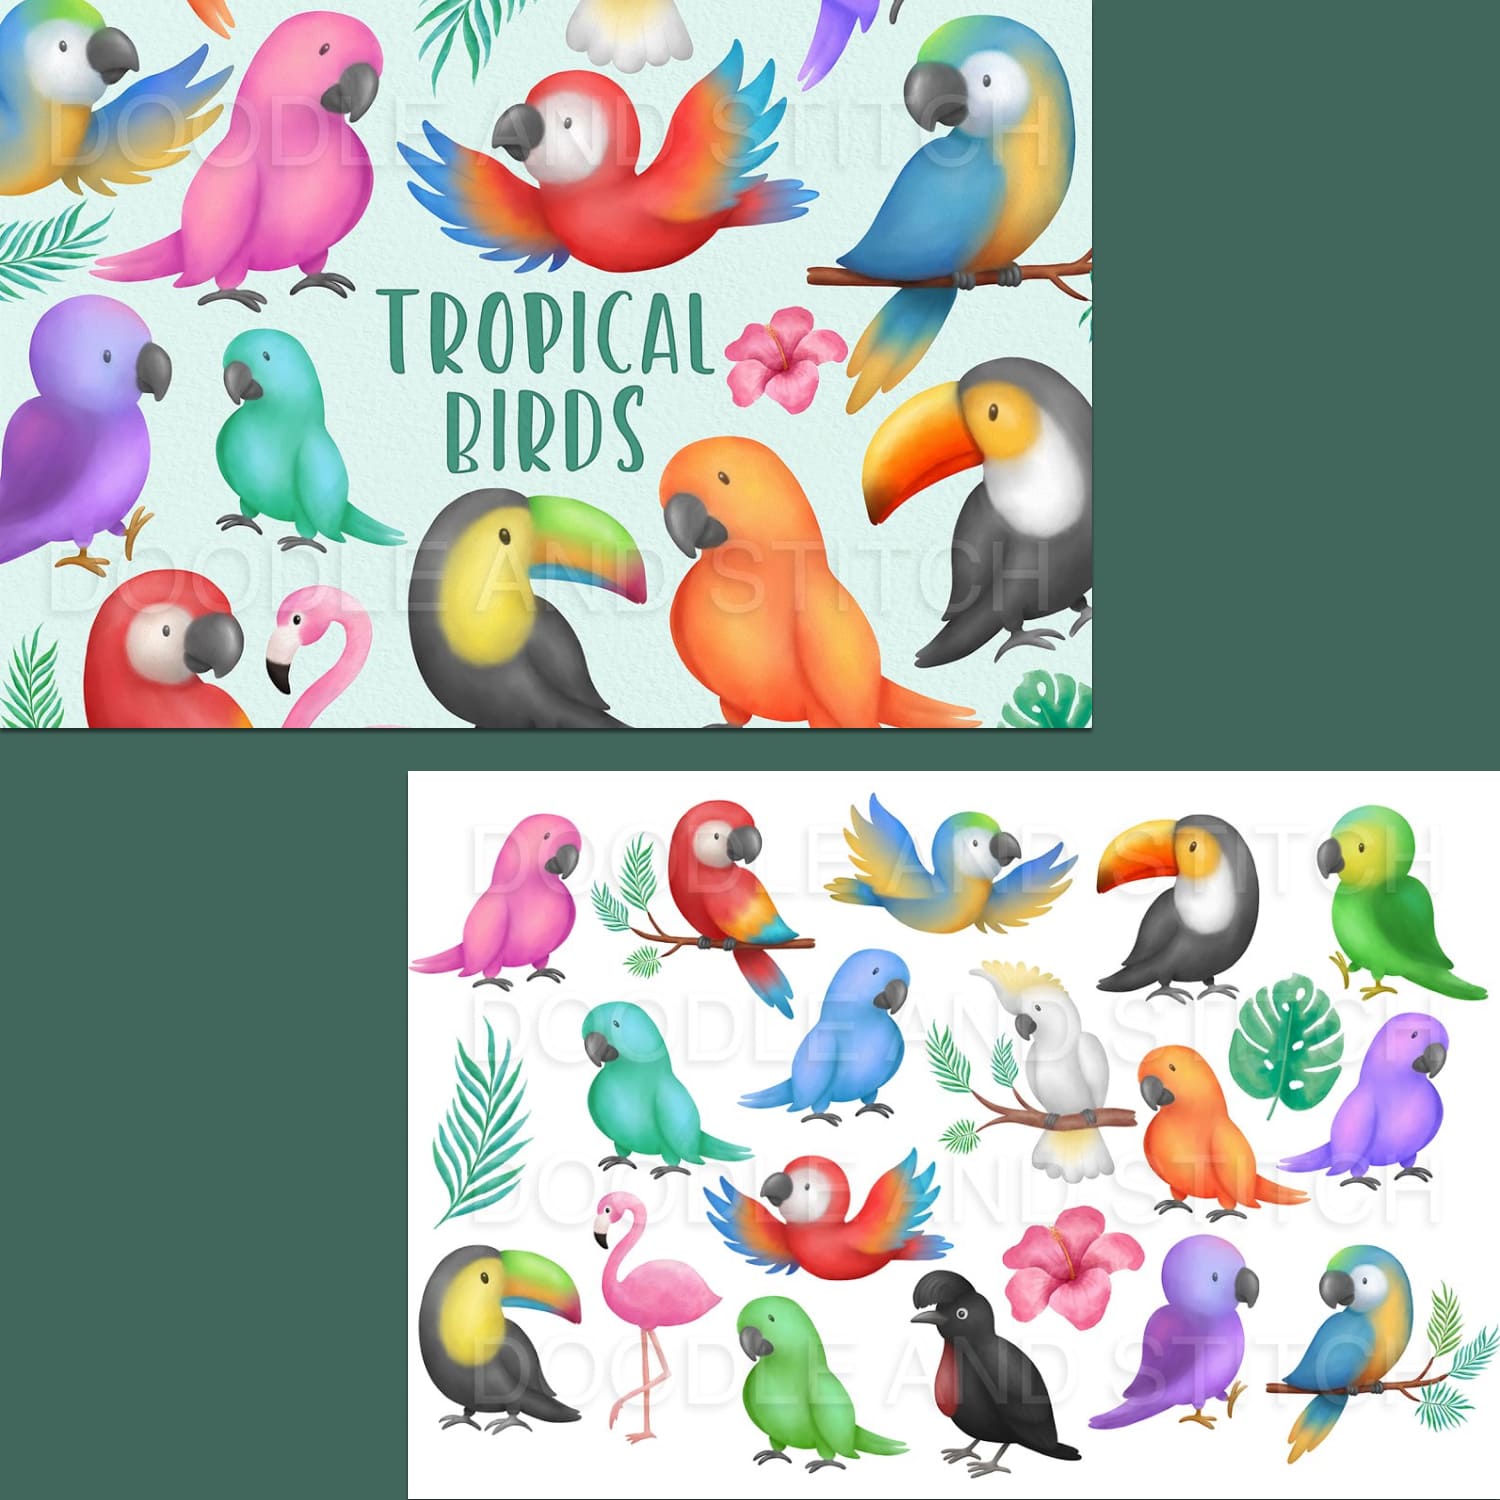 Tropical Birds Watercolor Clipart created by Doodle and Stitch.